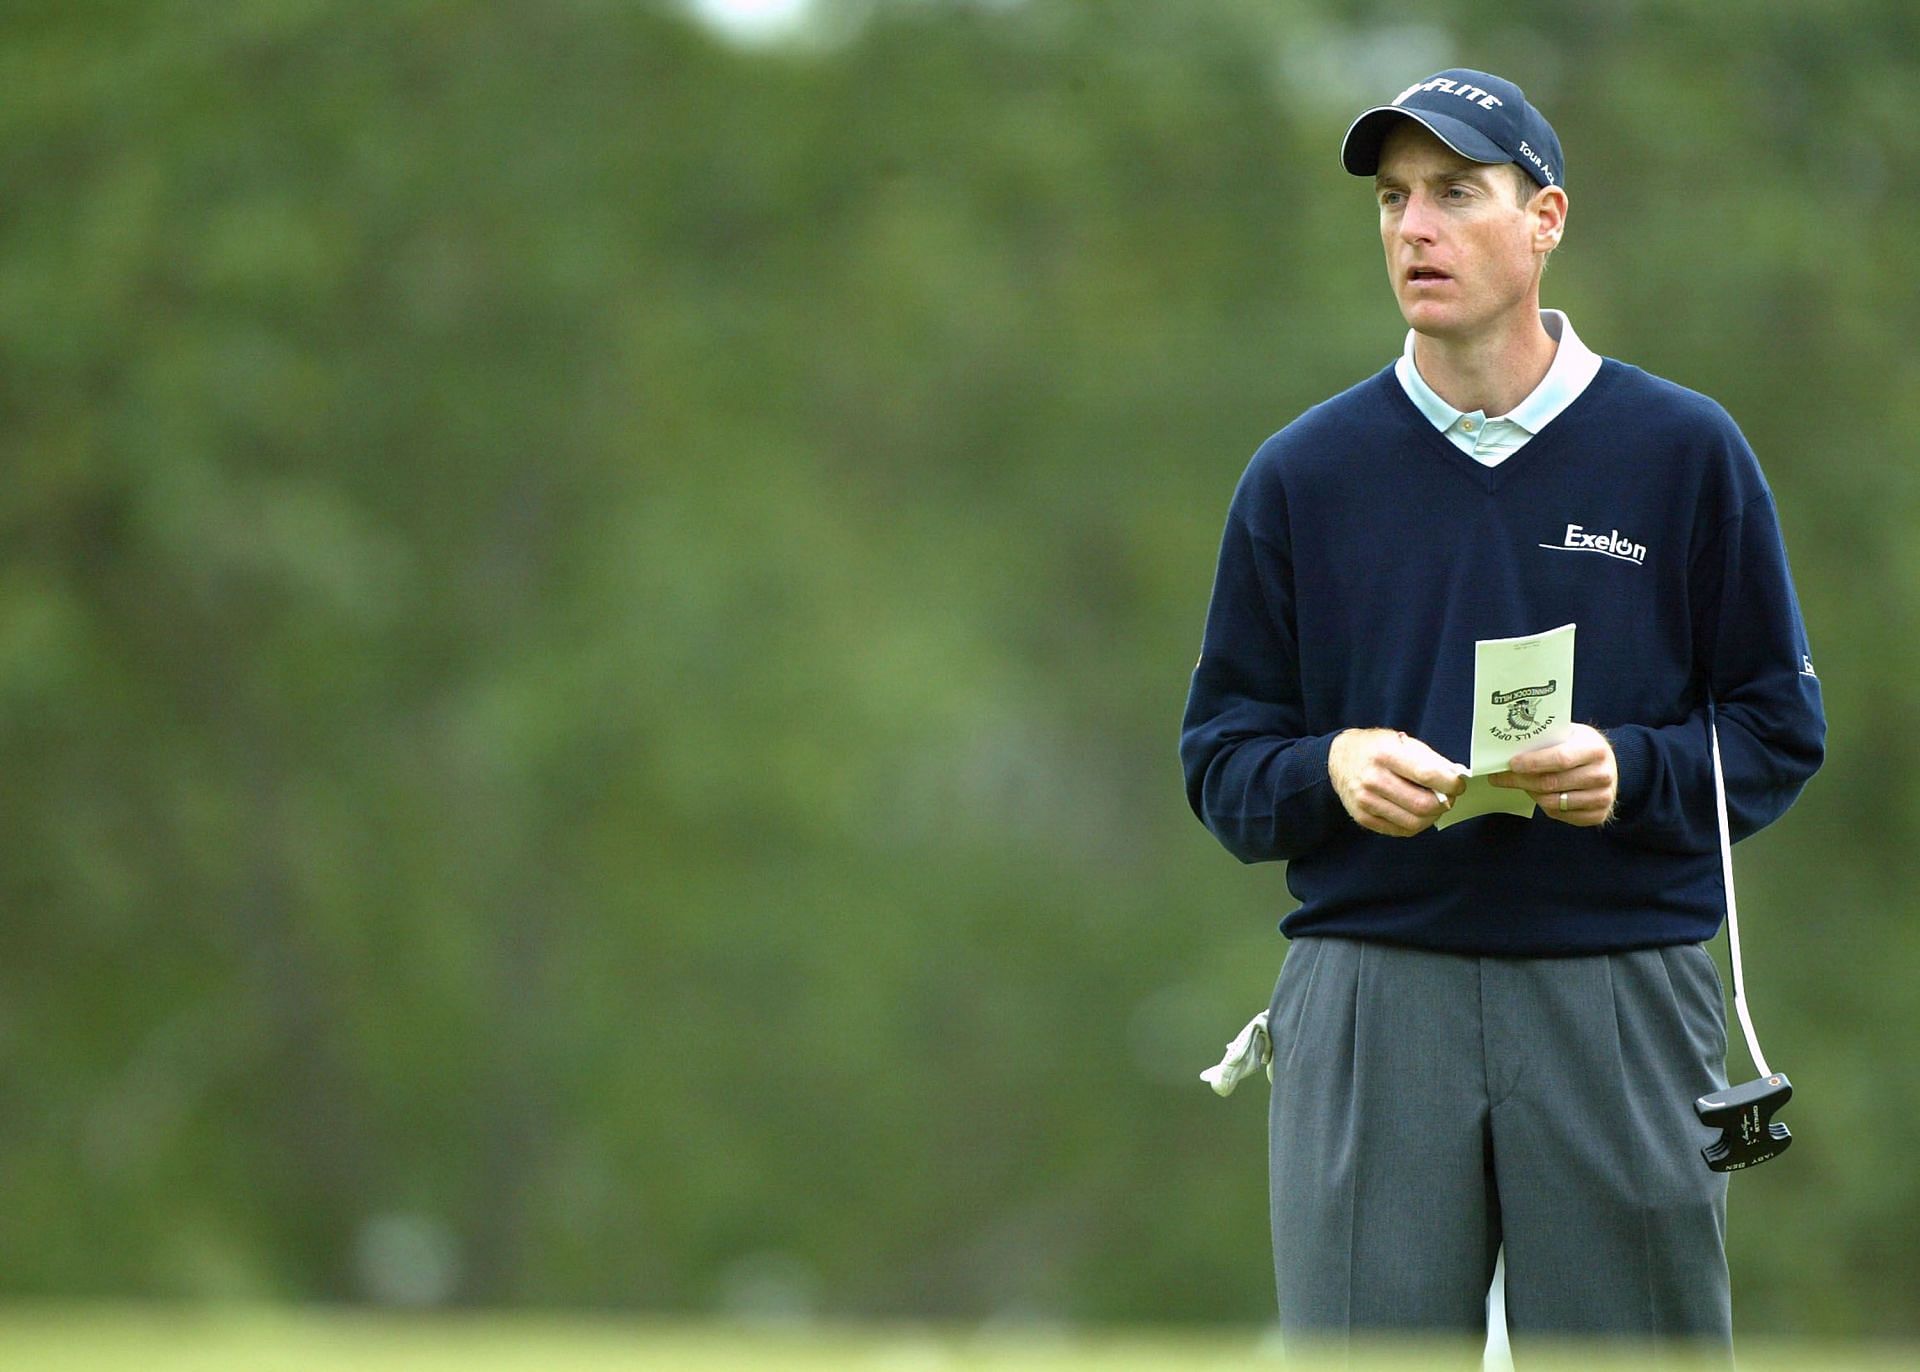 Jim Furyk at the 104th U.S. Open (Image via Getty)